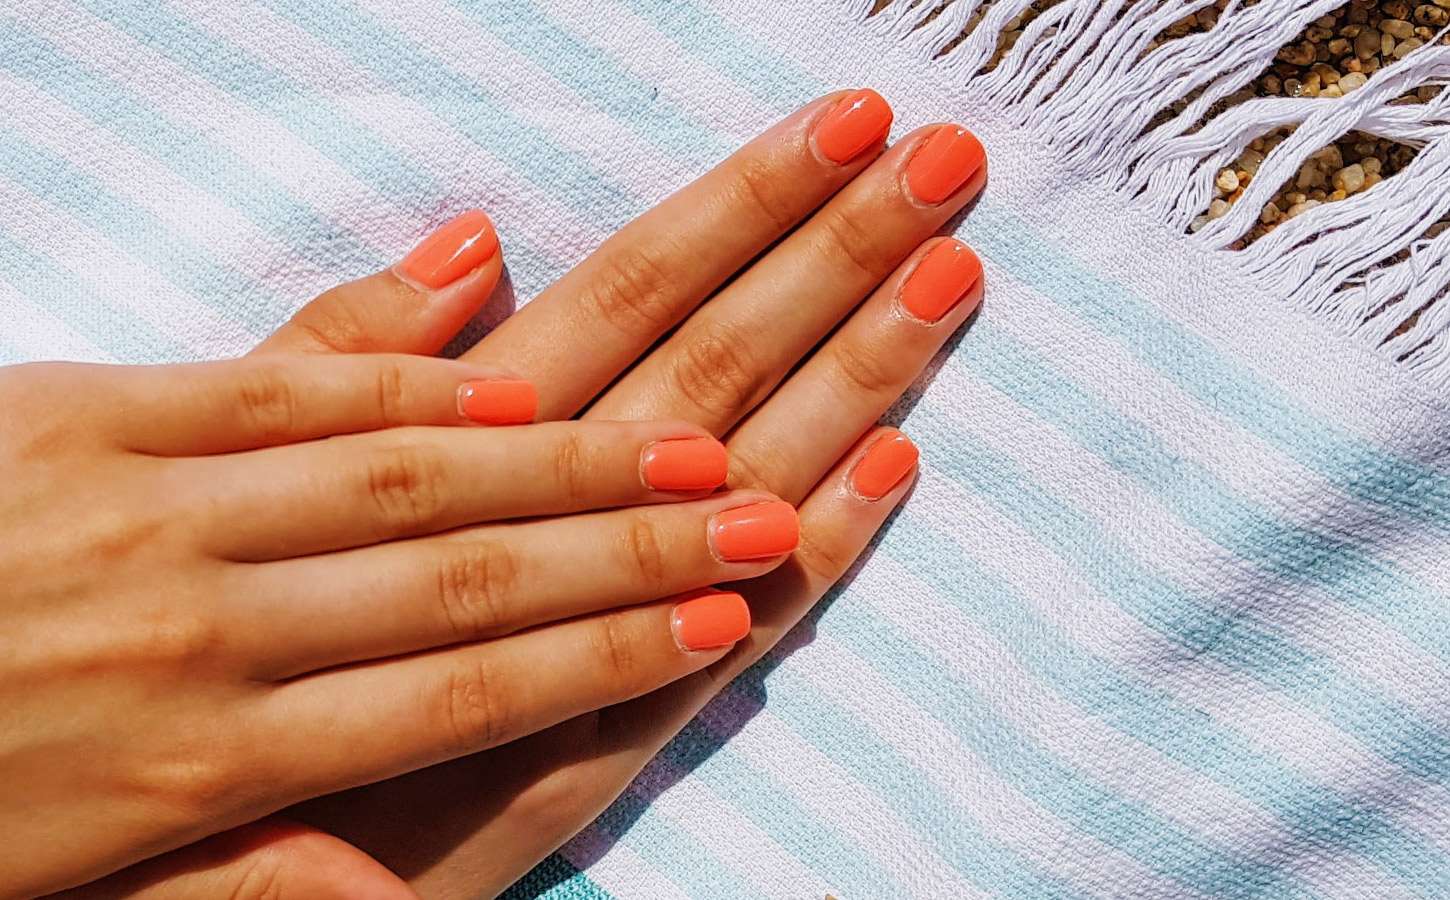 1073 Nail Salon Name Ideas for a Chic and Glamorous Start - Soocial